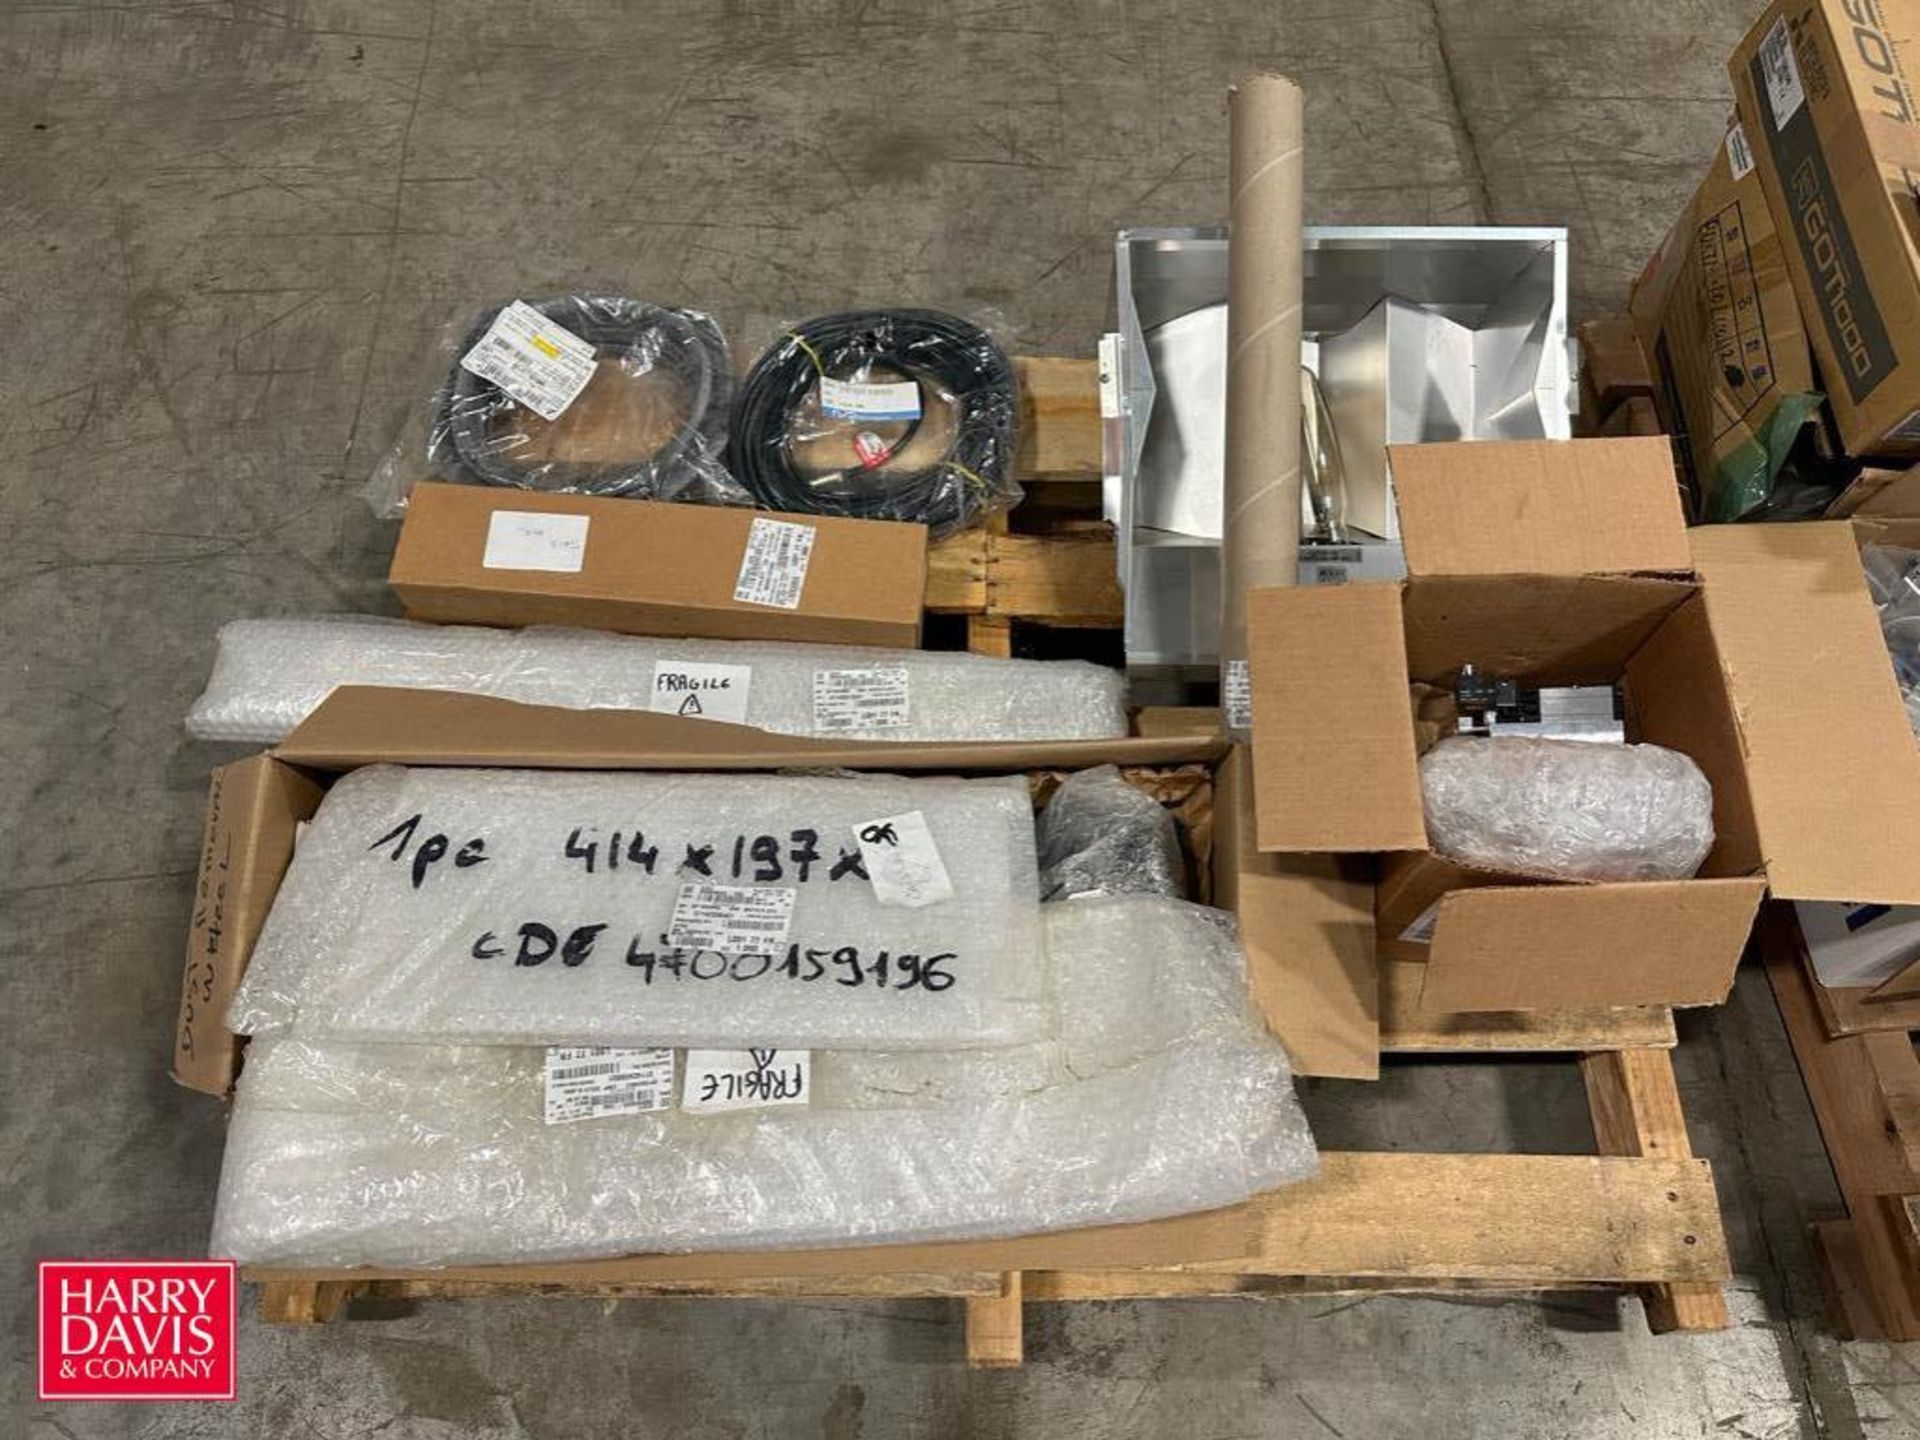 NEW Assorted Sidel Parts, Including: Gaskets, Light Bulbs, Light Housing, Tubing and Cables - Image 2 of 2